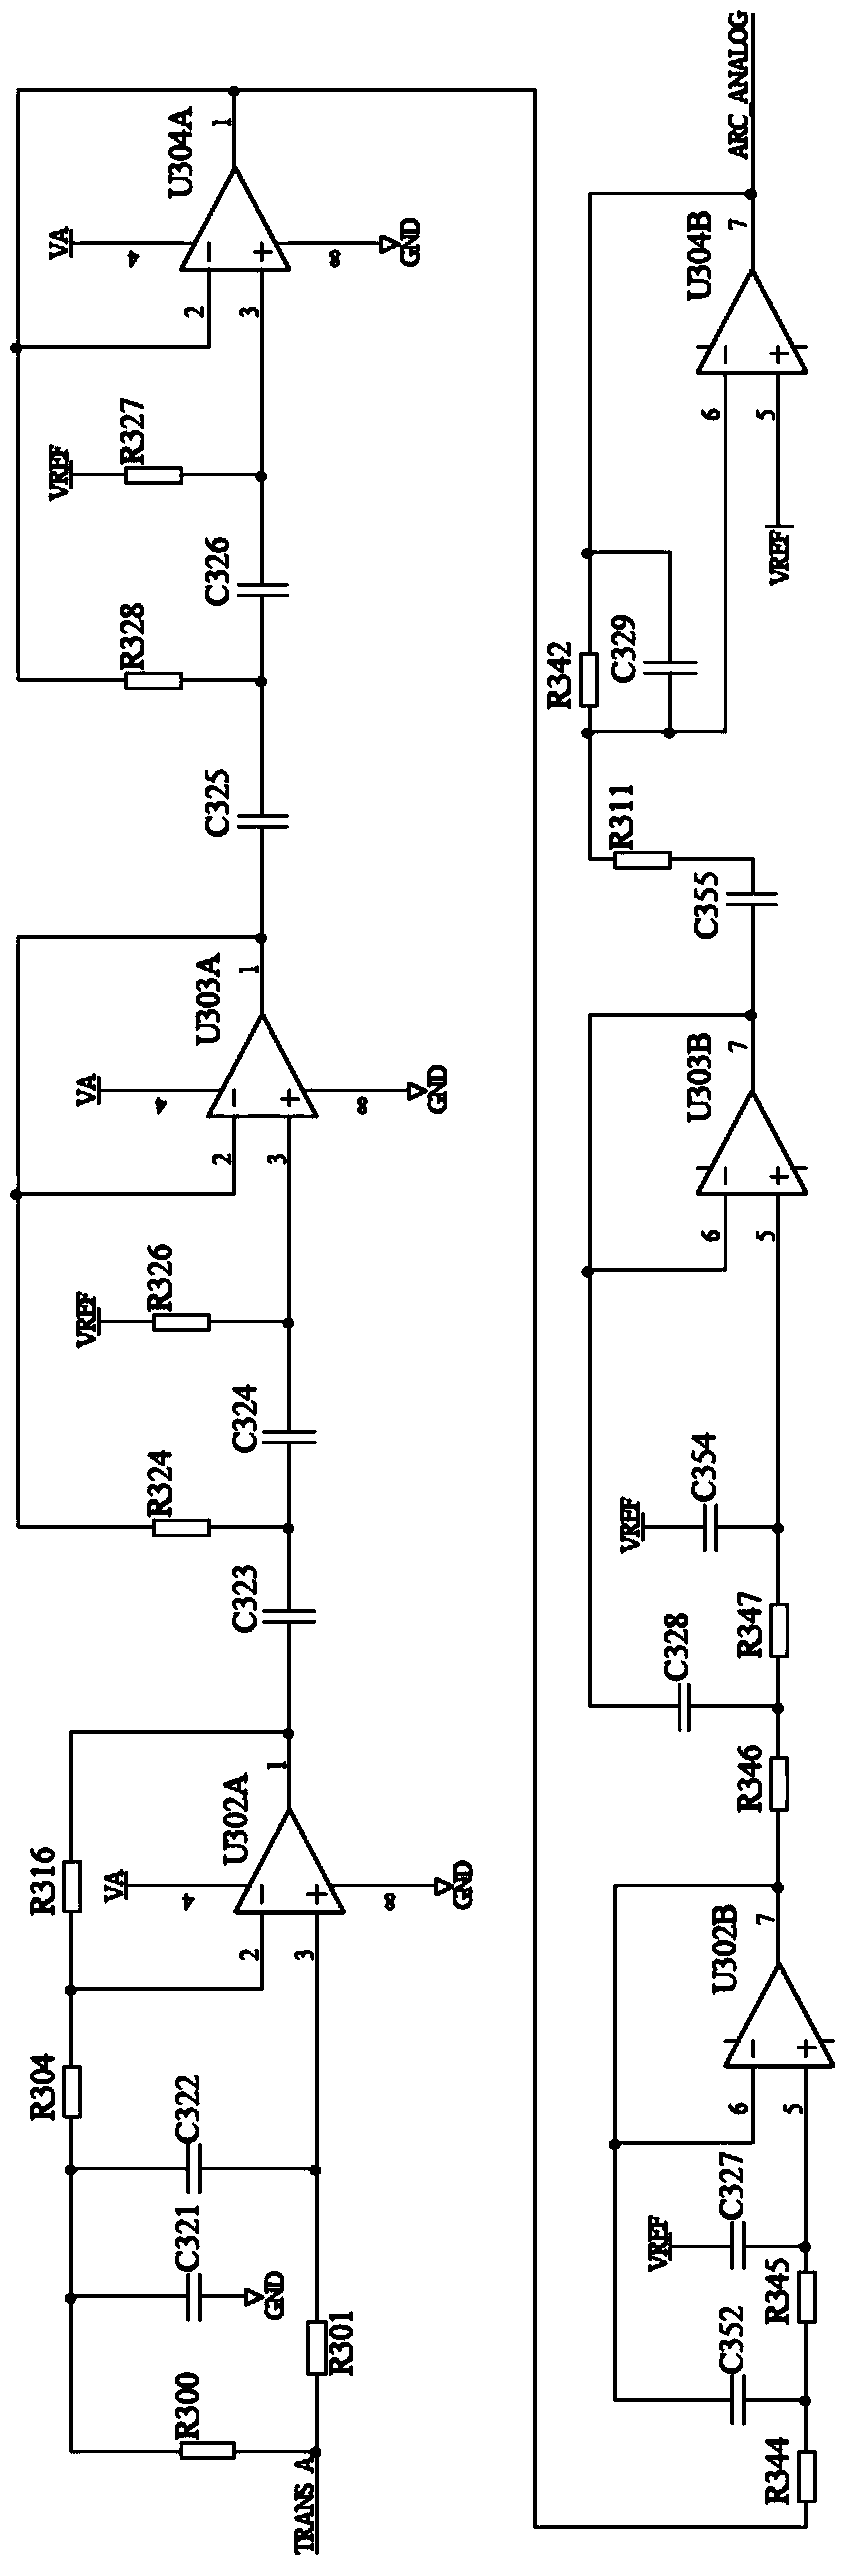 Fault arc detection device for electric car